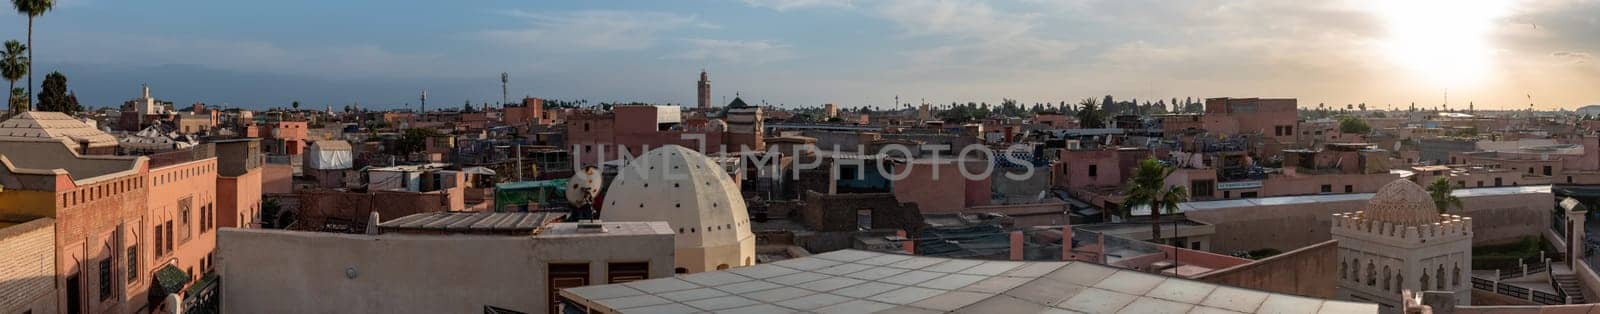 Panoramic view of the medina of Marrakech, the coupola of the Koubba Almoravid in the right side, seen from a rooftop, Morocco